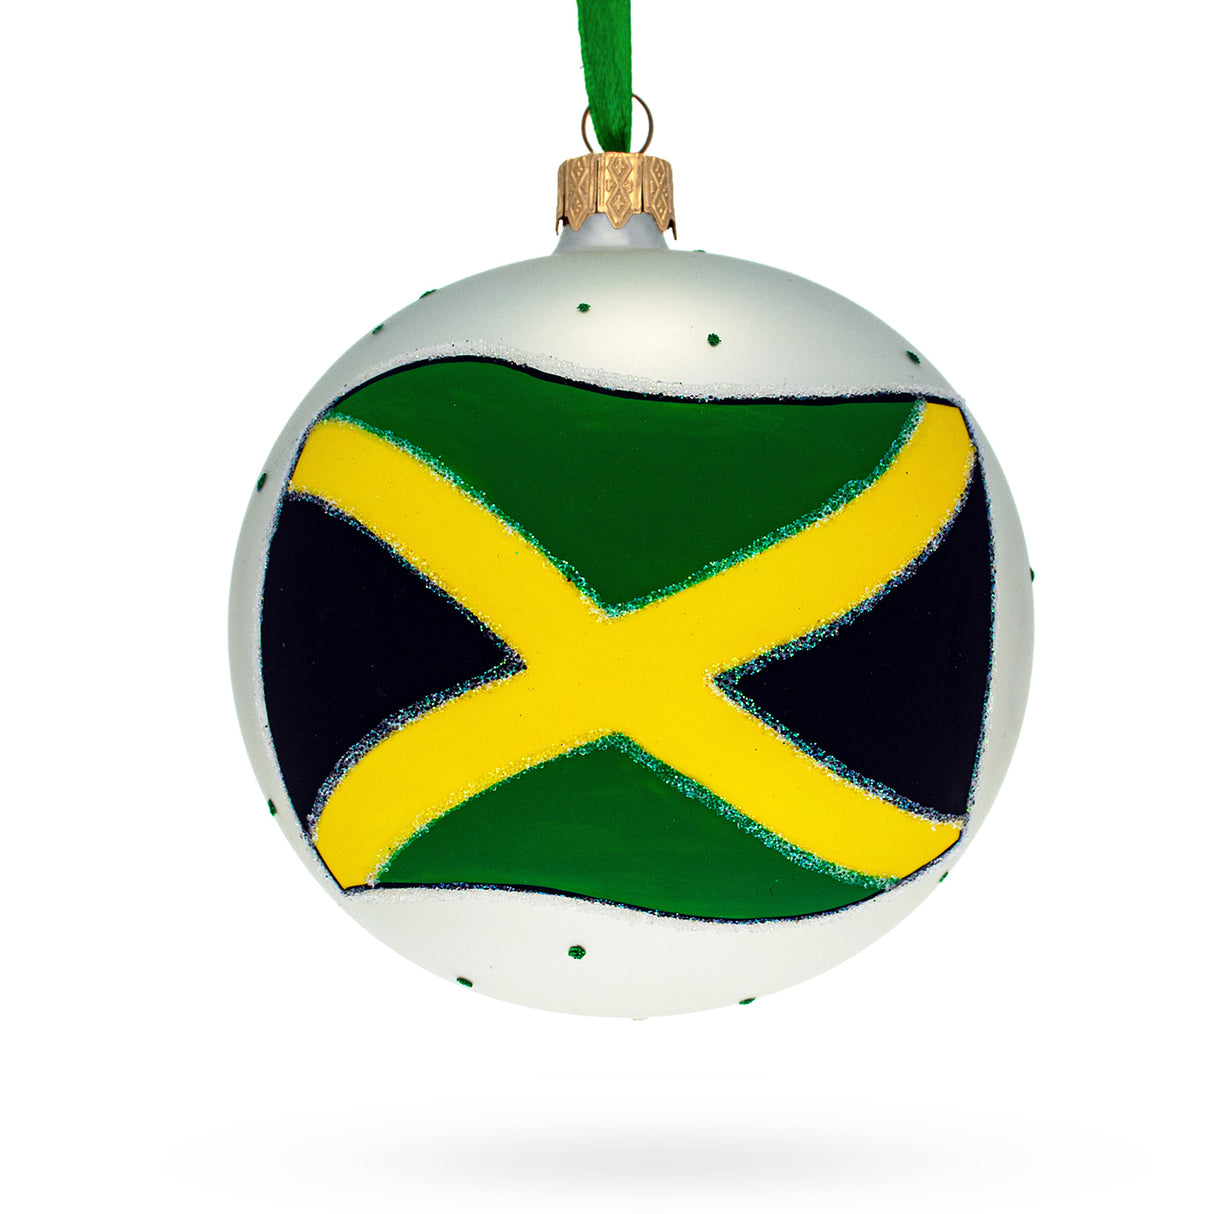 Caribbean Celebration: Flag of Jamaica Blown Glass Ball Christmas Ornament 4 Inches in Multi color, Round shape